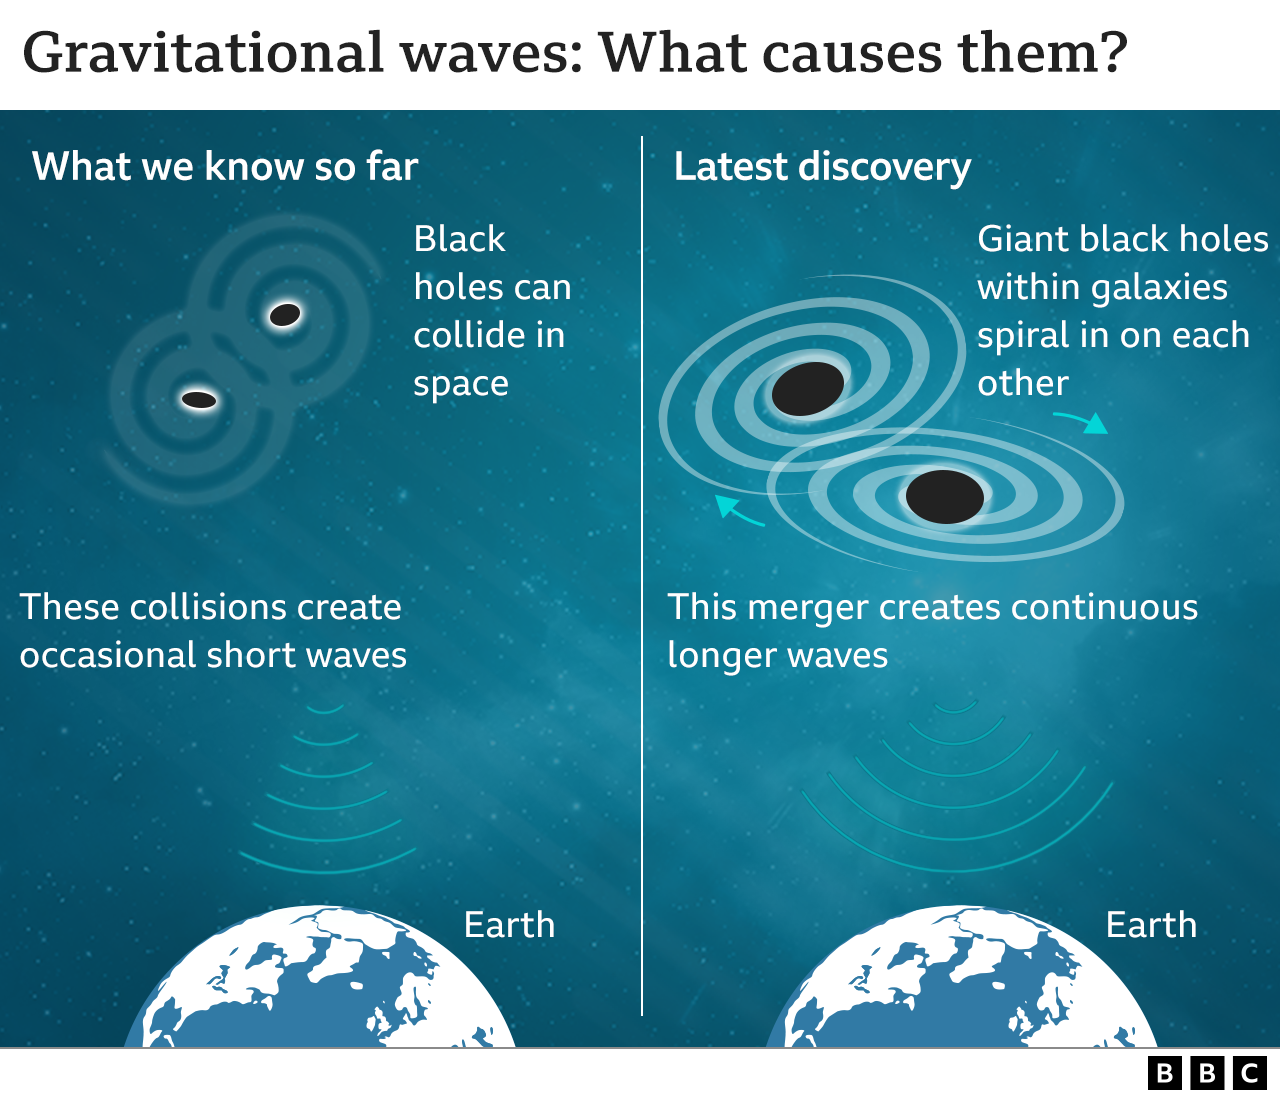 Graphic showing old and new gravitational waves